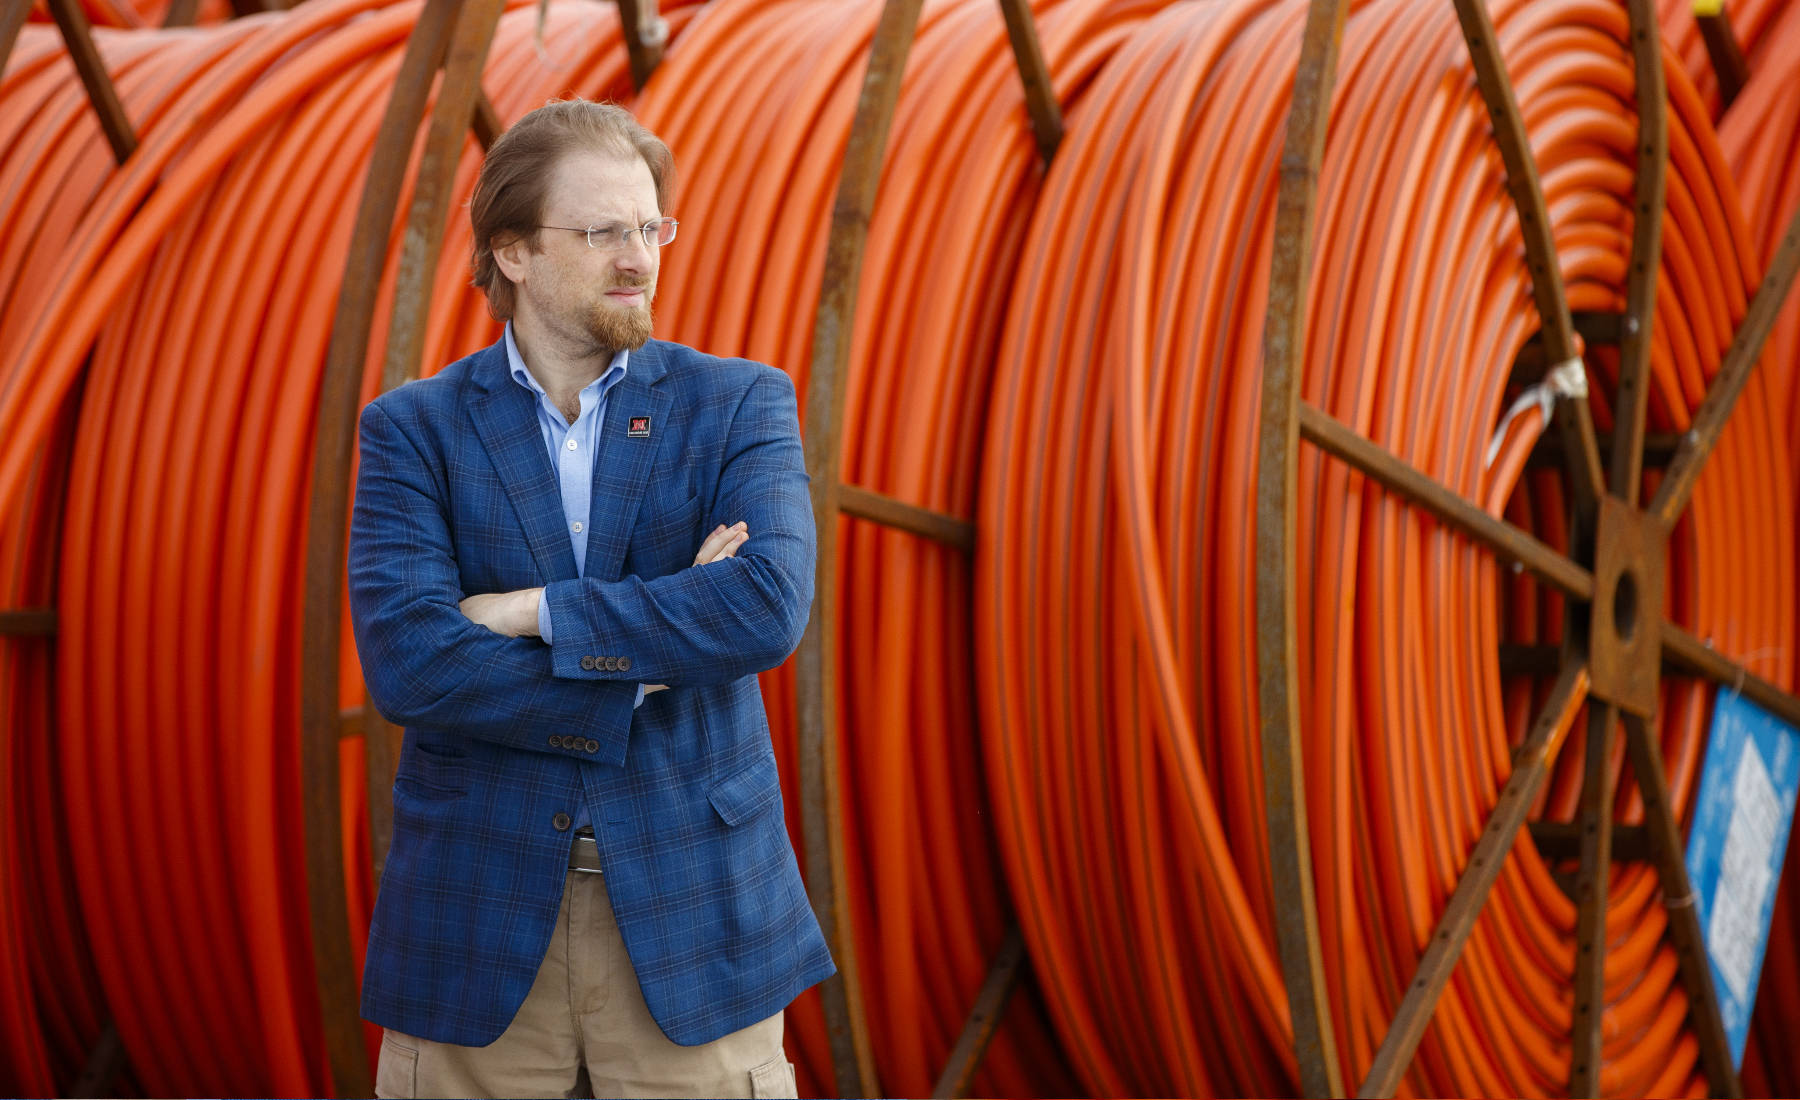 Gus Hurwitz portrait outside with cable spools